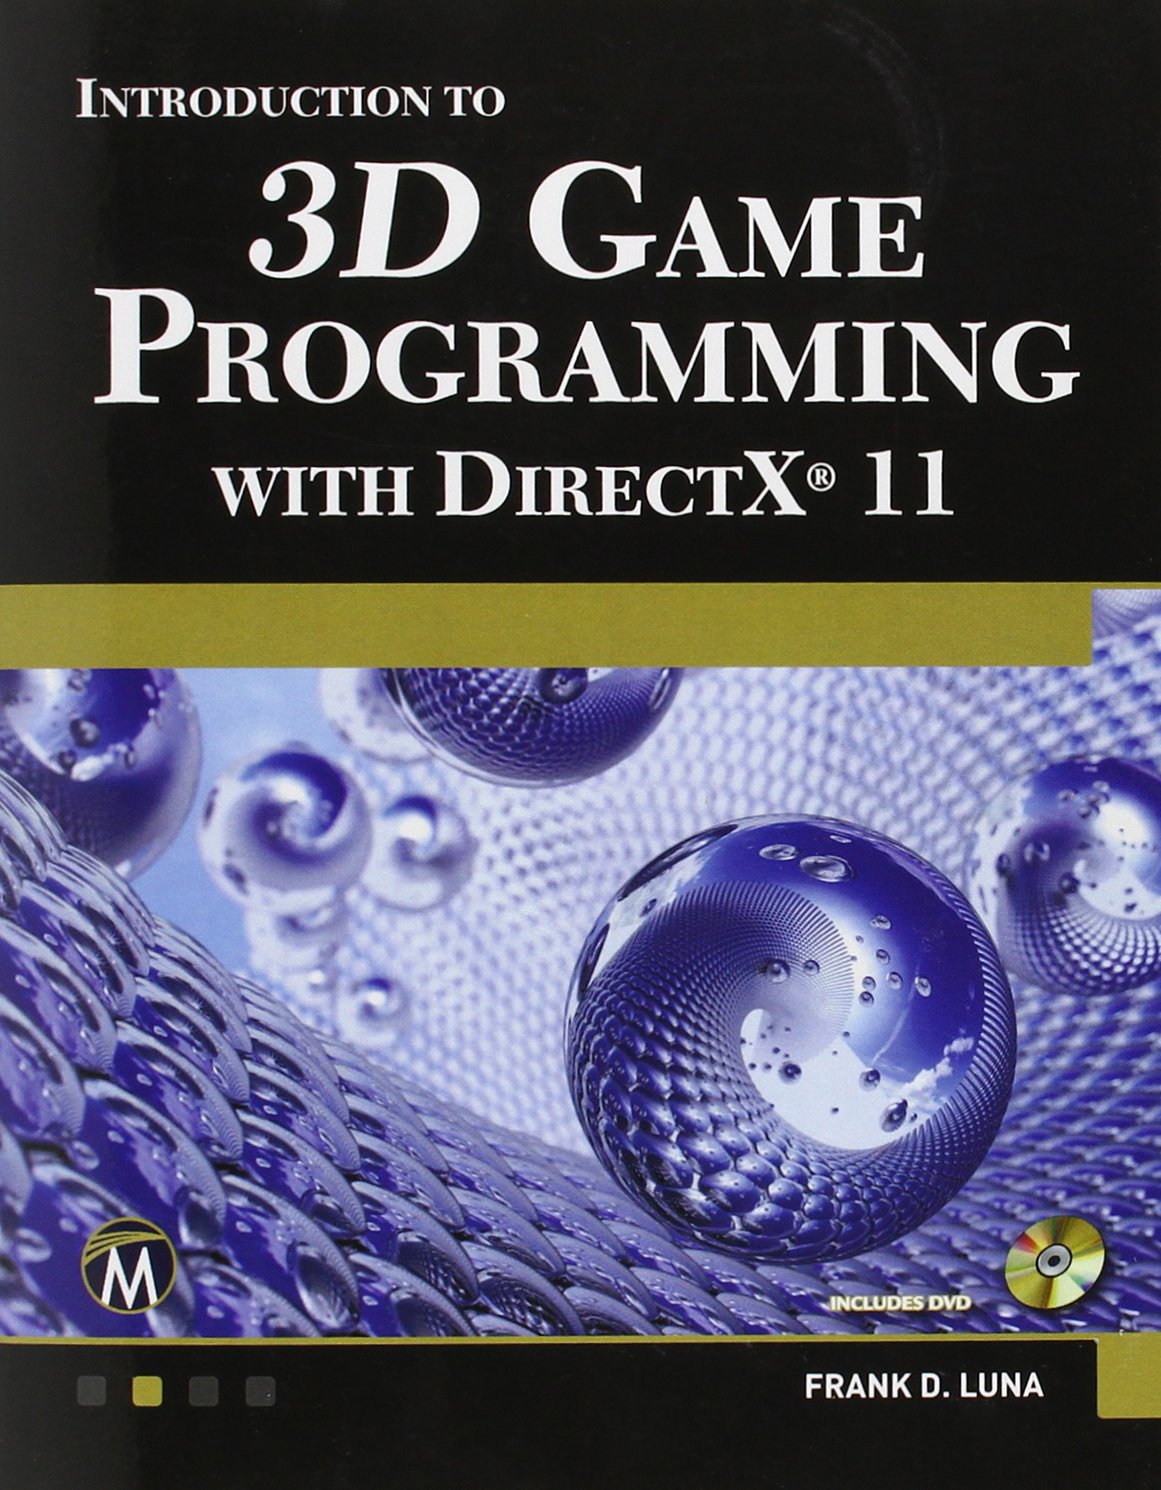 introduction to 3d game programming with directx 10.0 pdf